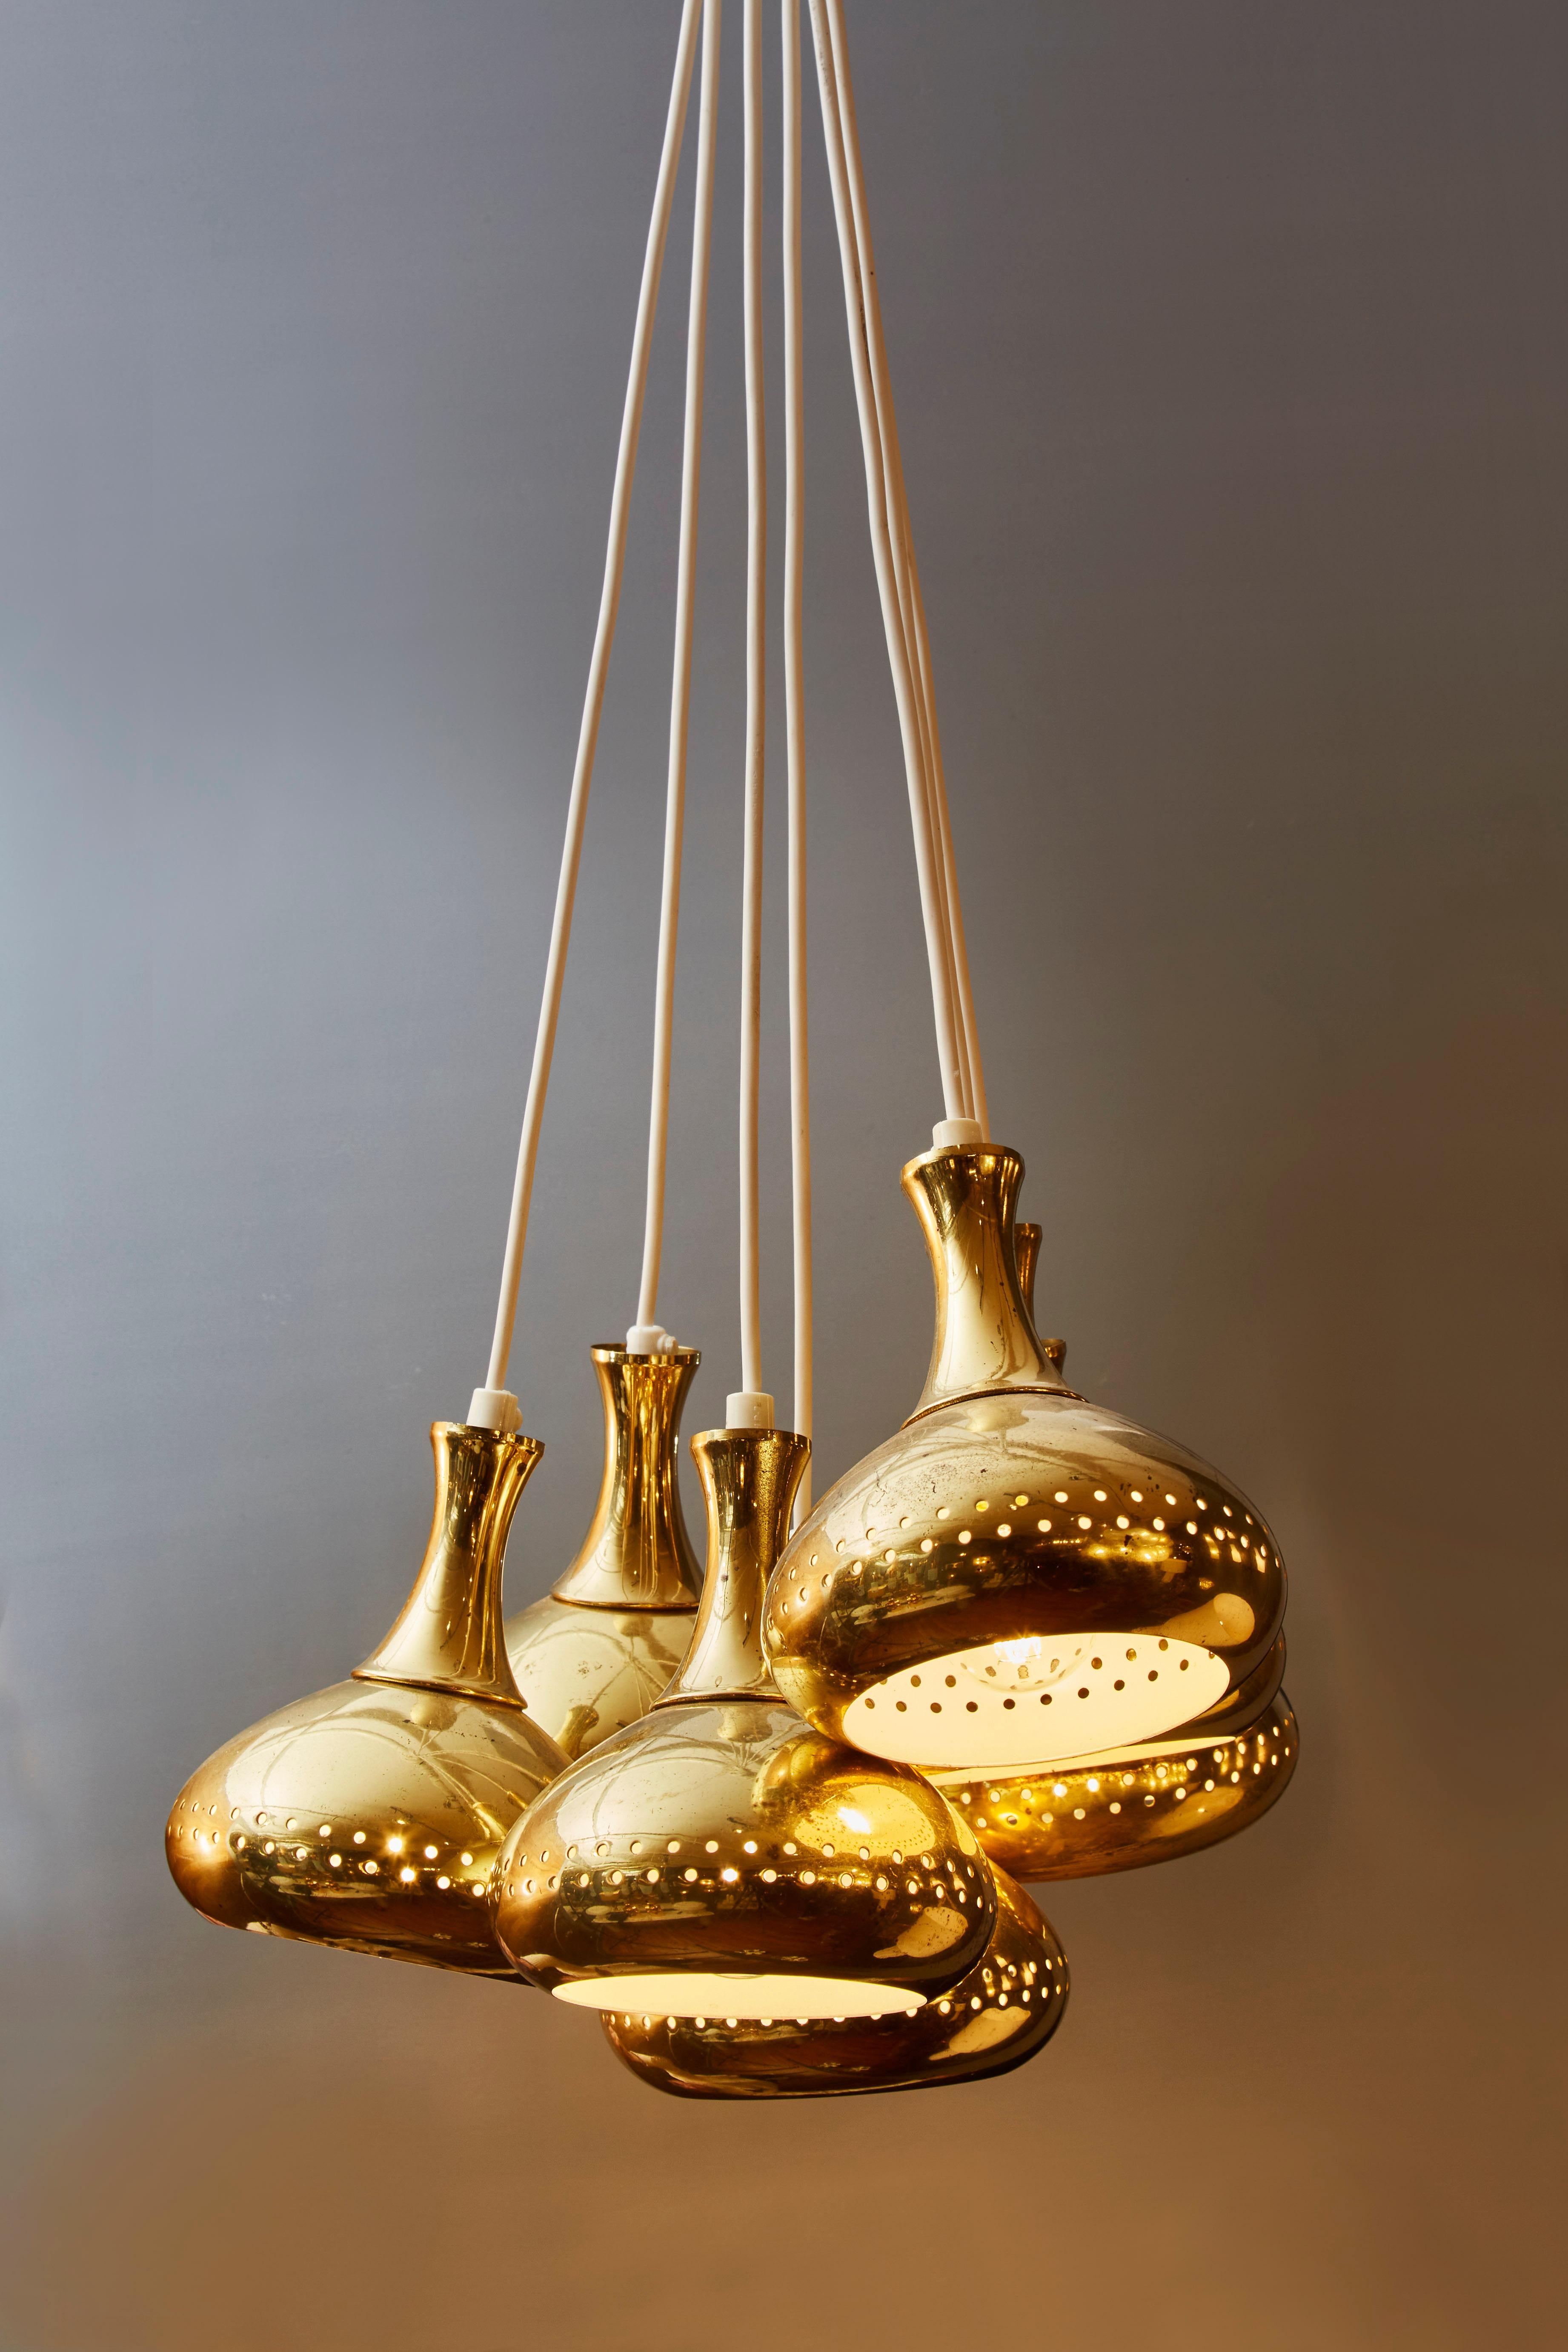 Seven individual pendants designed by Hans Agne Jakobsson in the 1950s.

Each are made of perforated brass and are newly rewired.